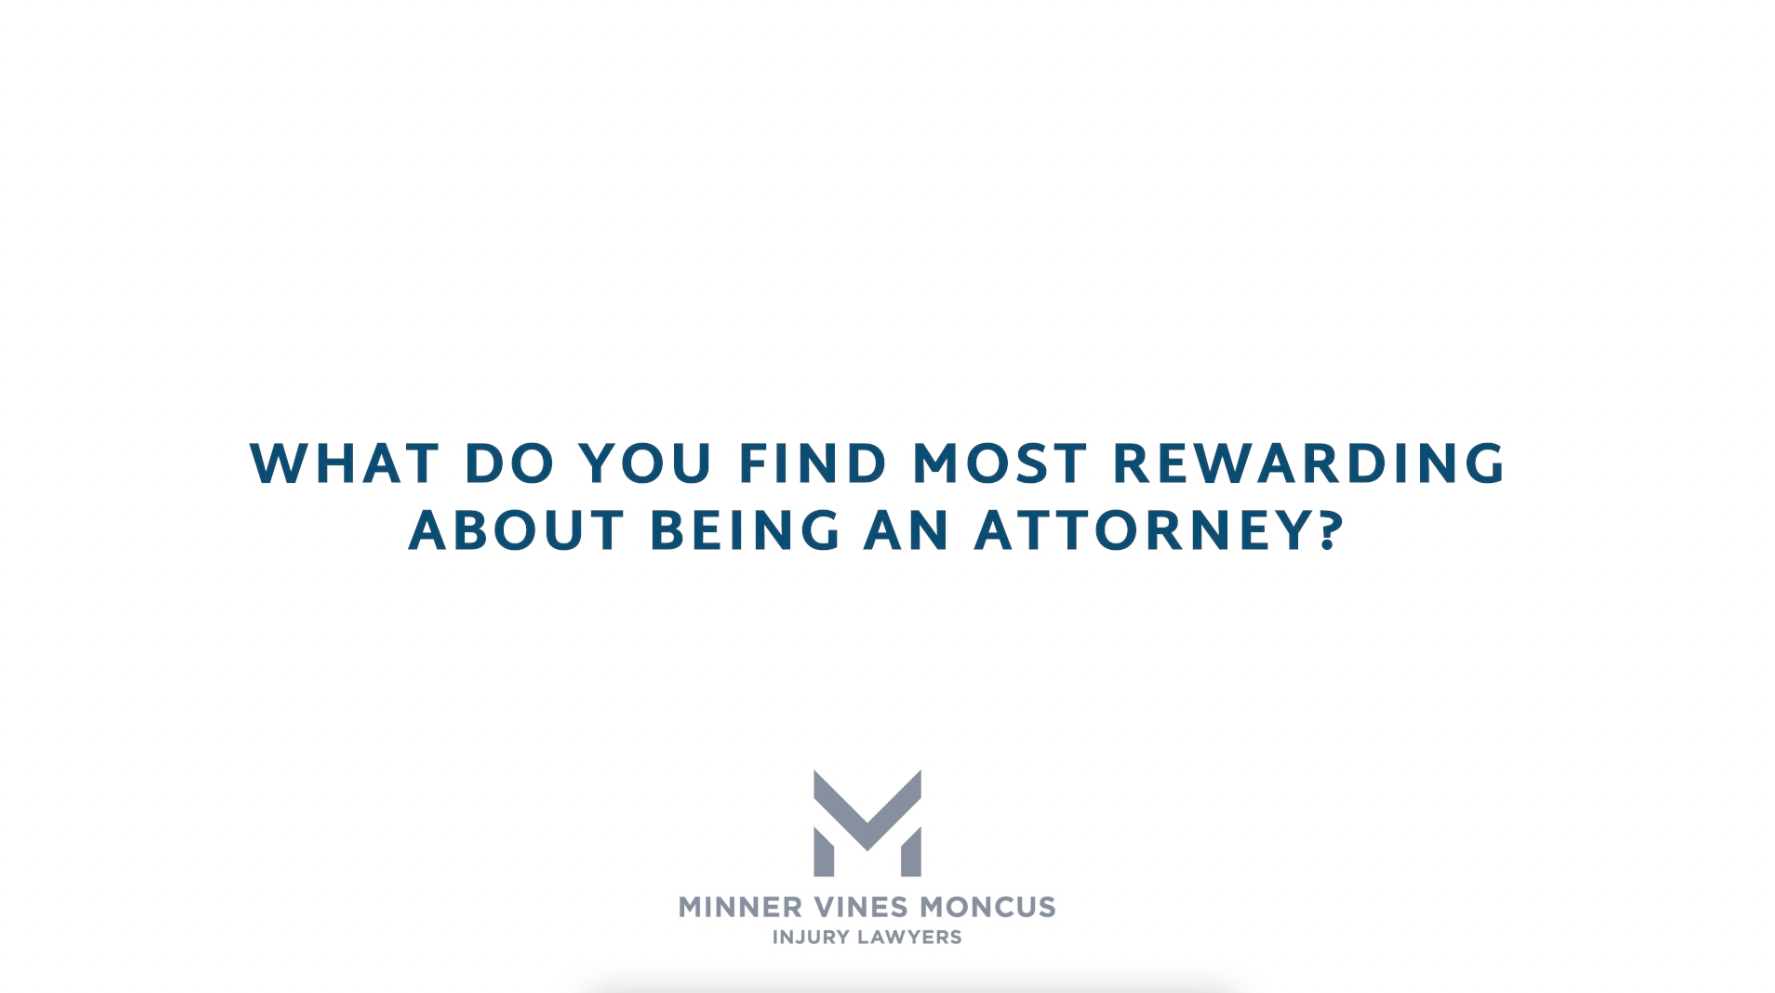 What do you find most rewarding about being an attorney?